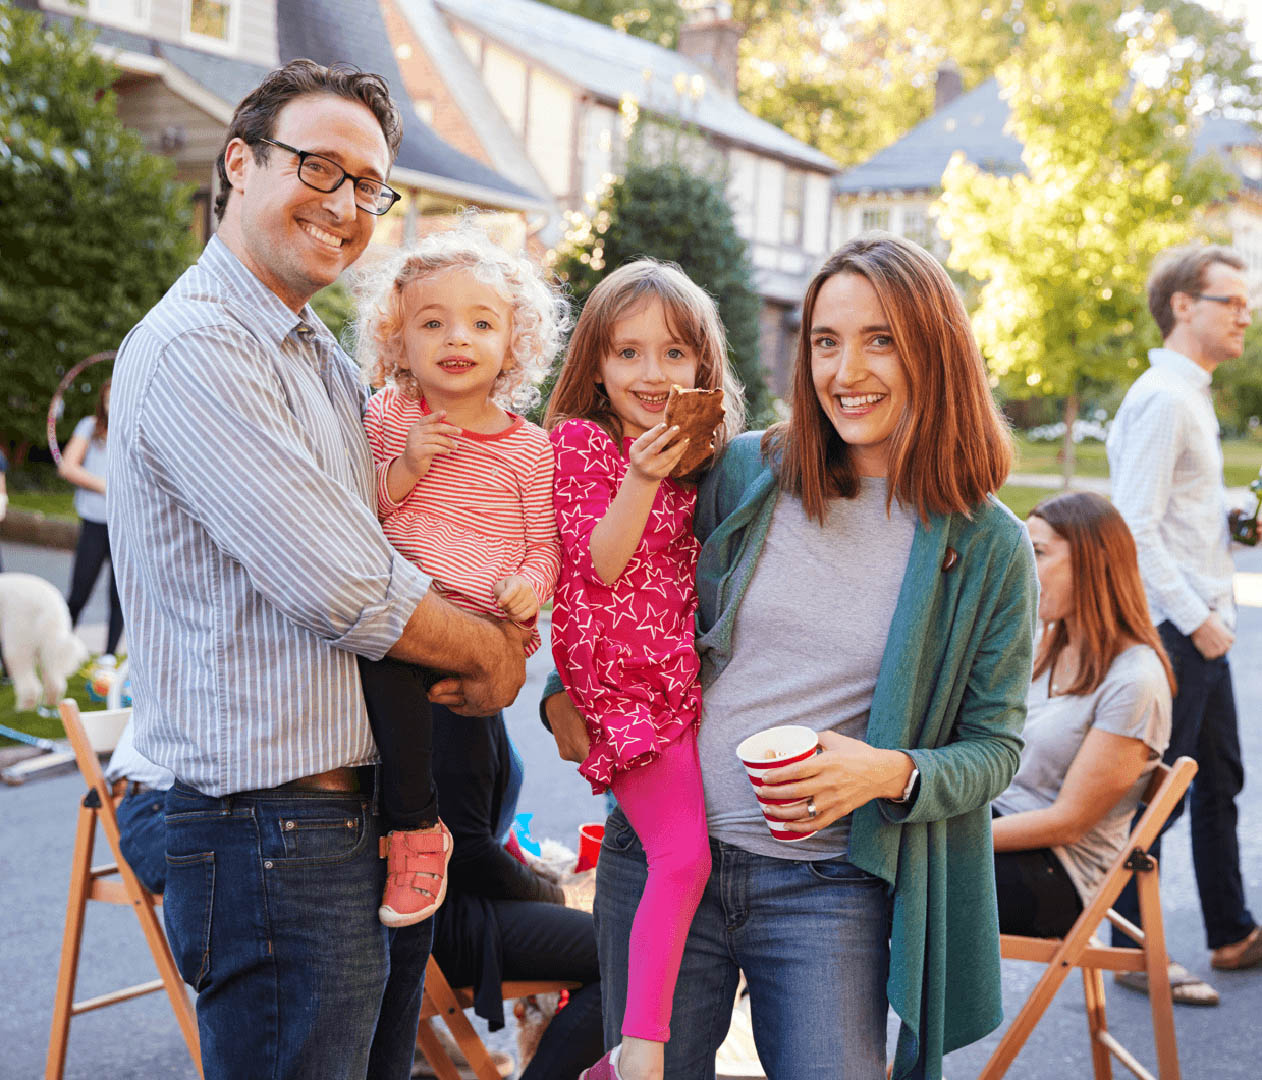 Reasons Why Now Is a Great Time to Buy Your First Home Family Image